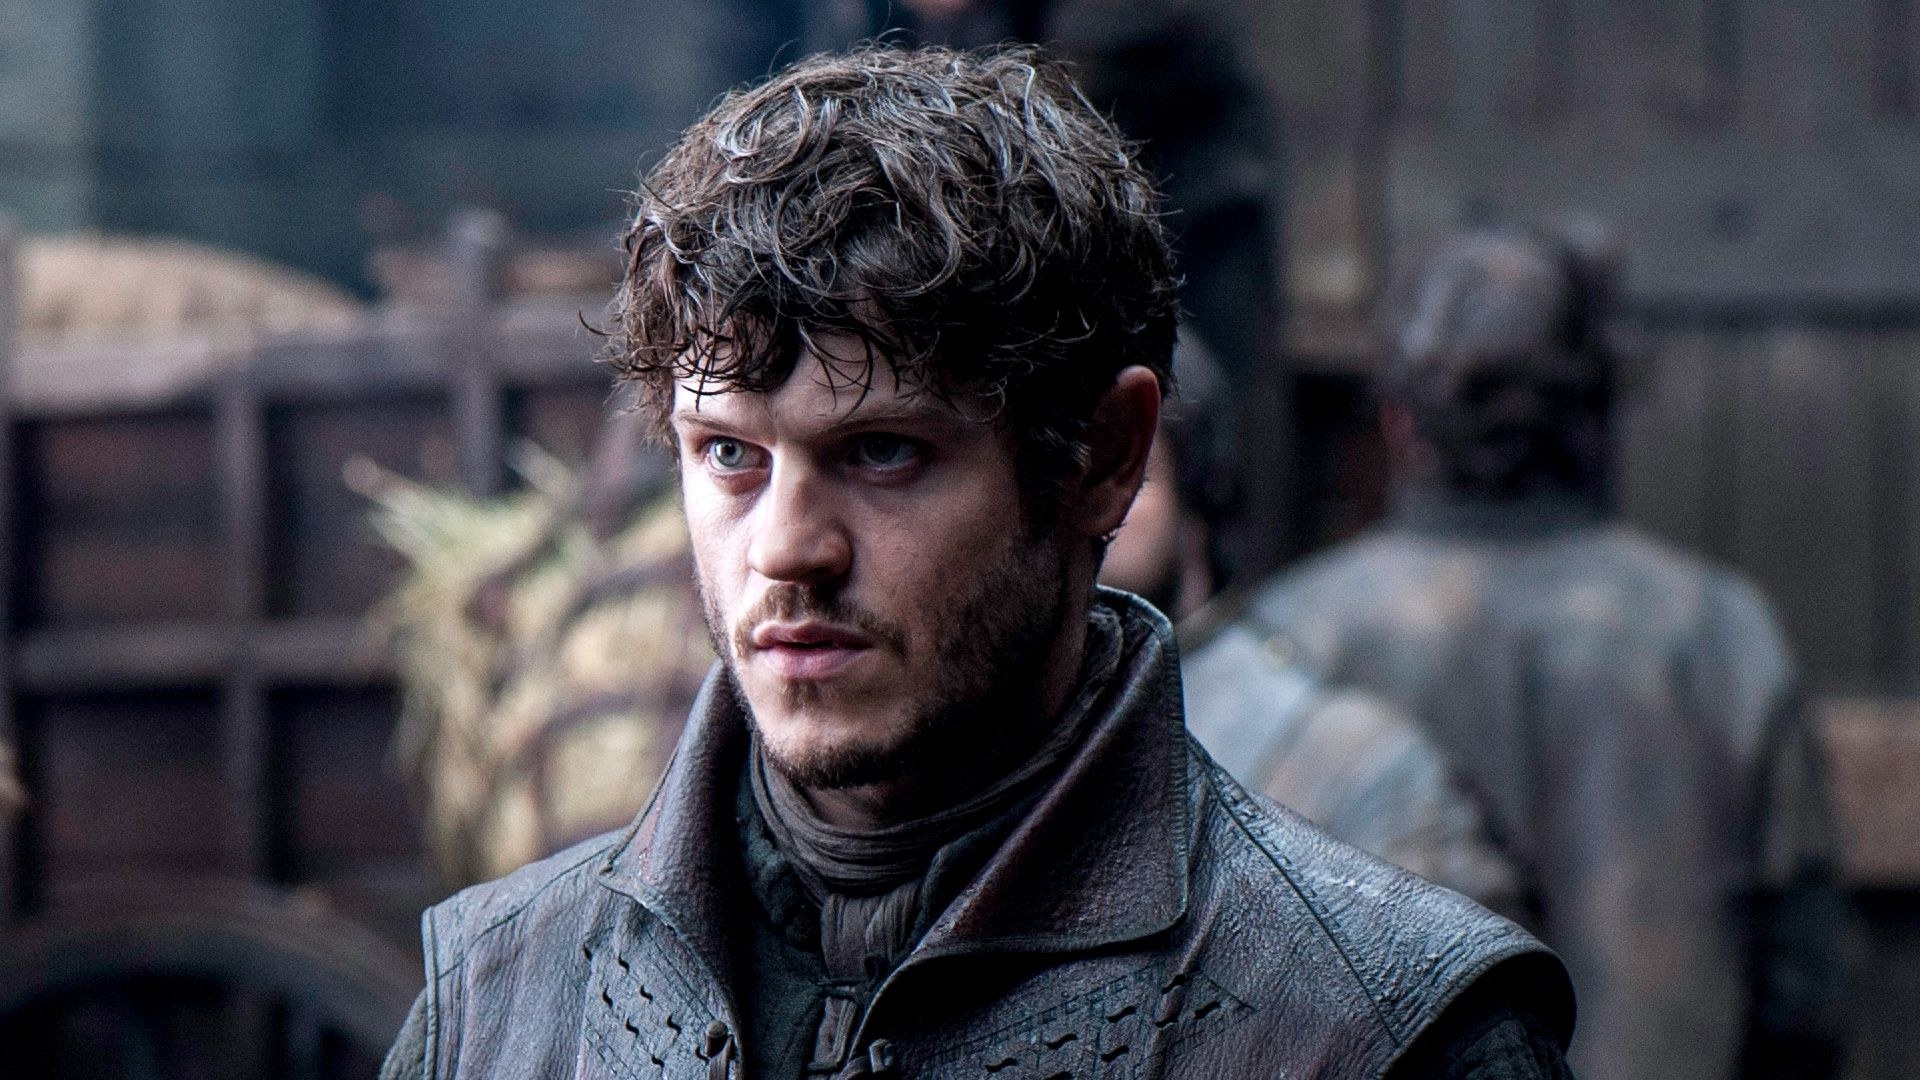 Iwan Rheon as Ramsay Bolton in &quot;Game of Thrones&quot;